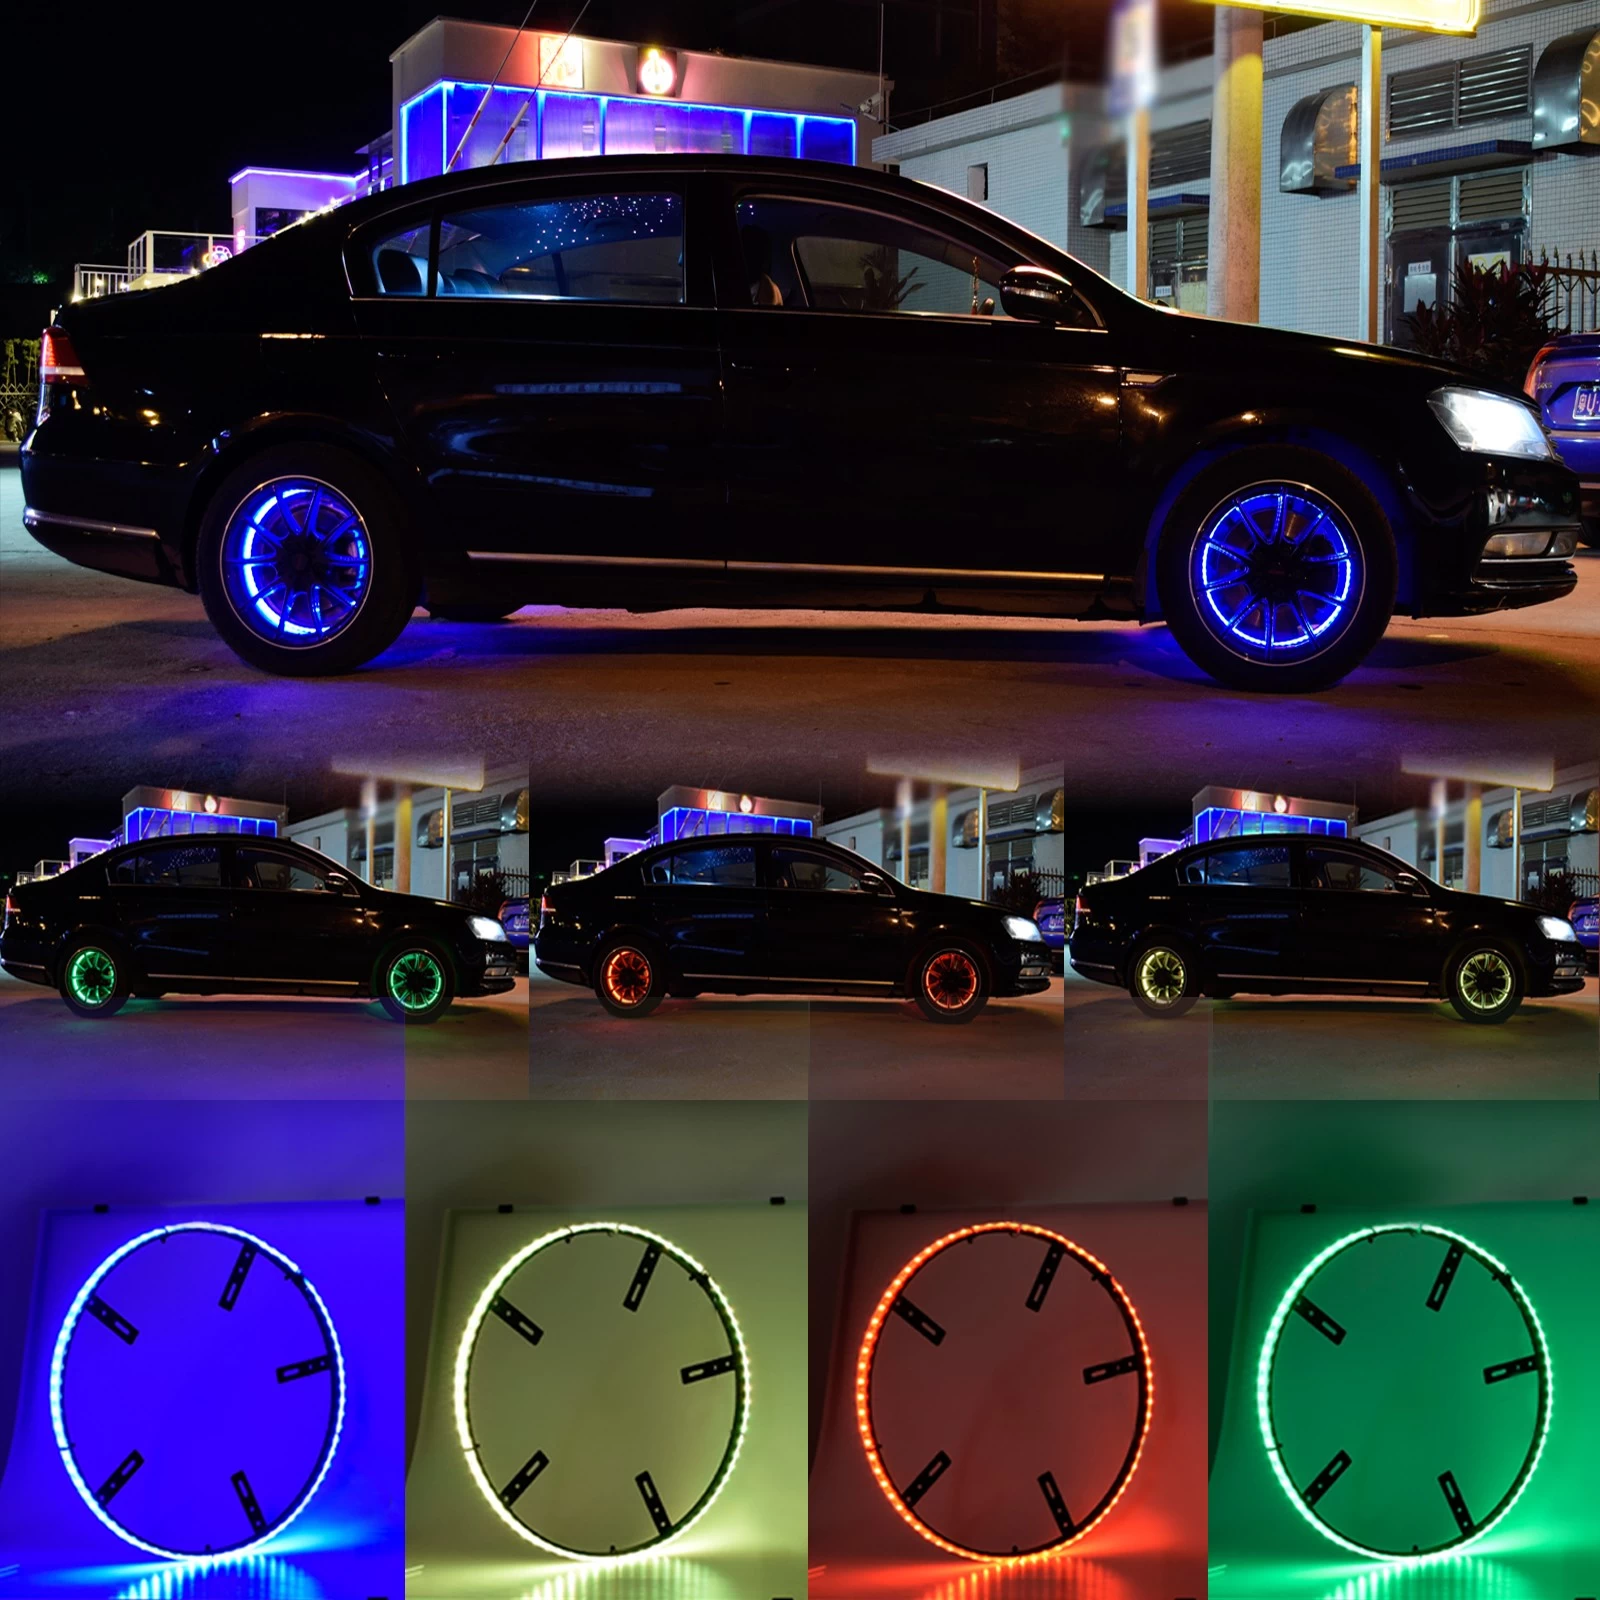 Unionlux 14.5" 15.5inch LED Wheel Ring Light Kit RGB LED Wheel Ring Light Kit Tire Lights Turn Signal And Braking Function Can Controlled By Bluetooth Multi Mode Color Waterproof